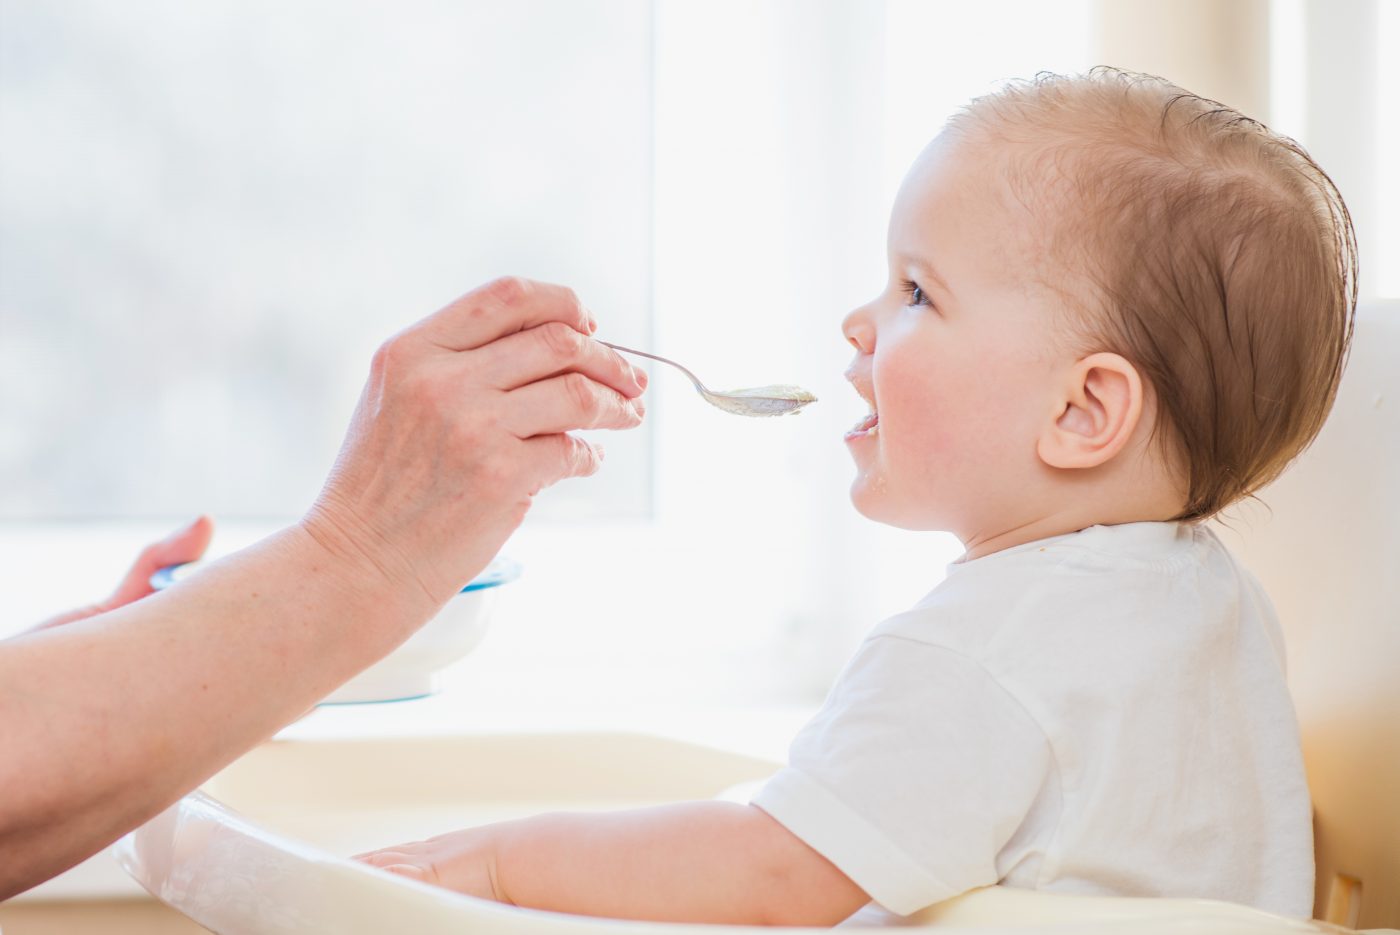 ISDI Q&A on NRVs-R for older infants and young children